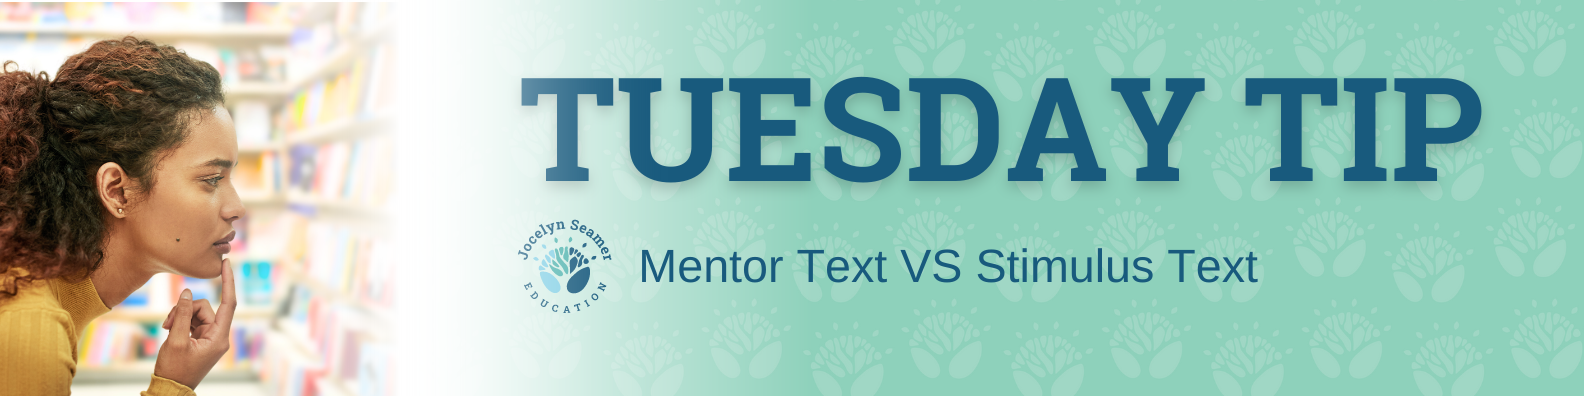 Tuesday Tip Banner